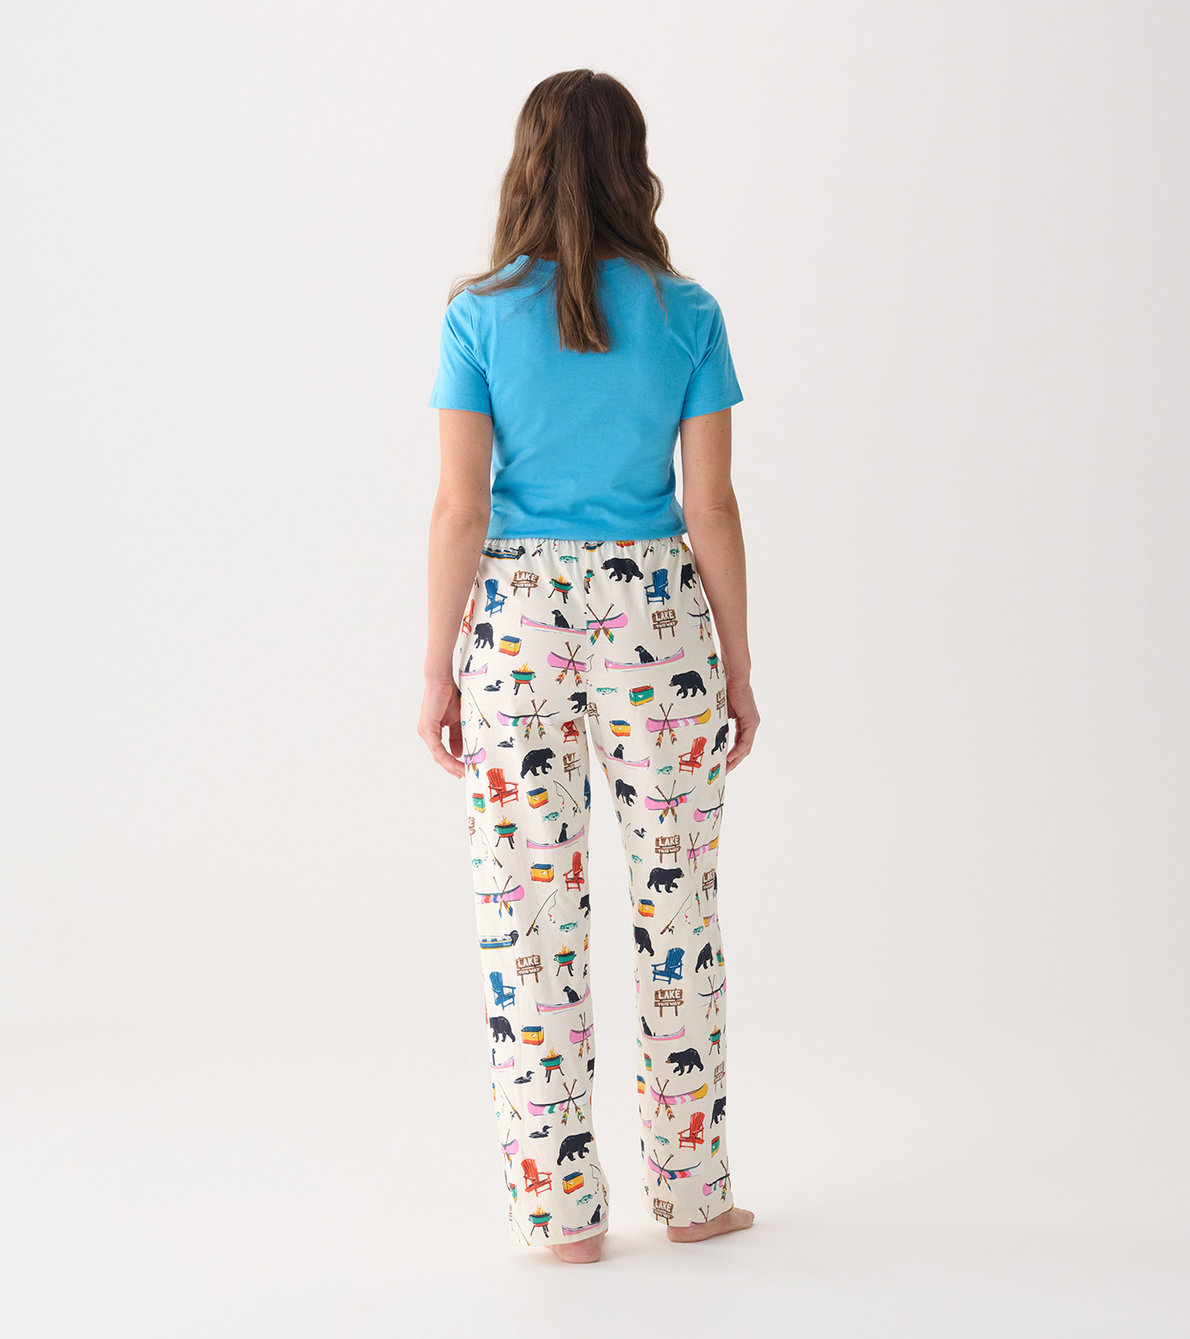 View larger image of Women's Paddle Your Own Canoe T-Shirt and Pants Pajama Separates